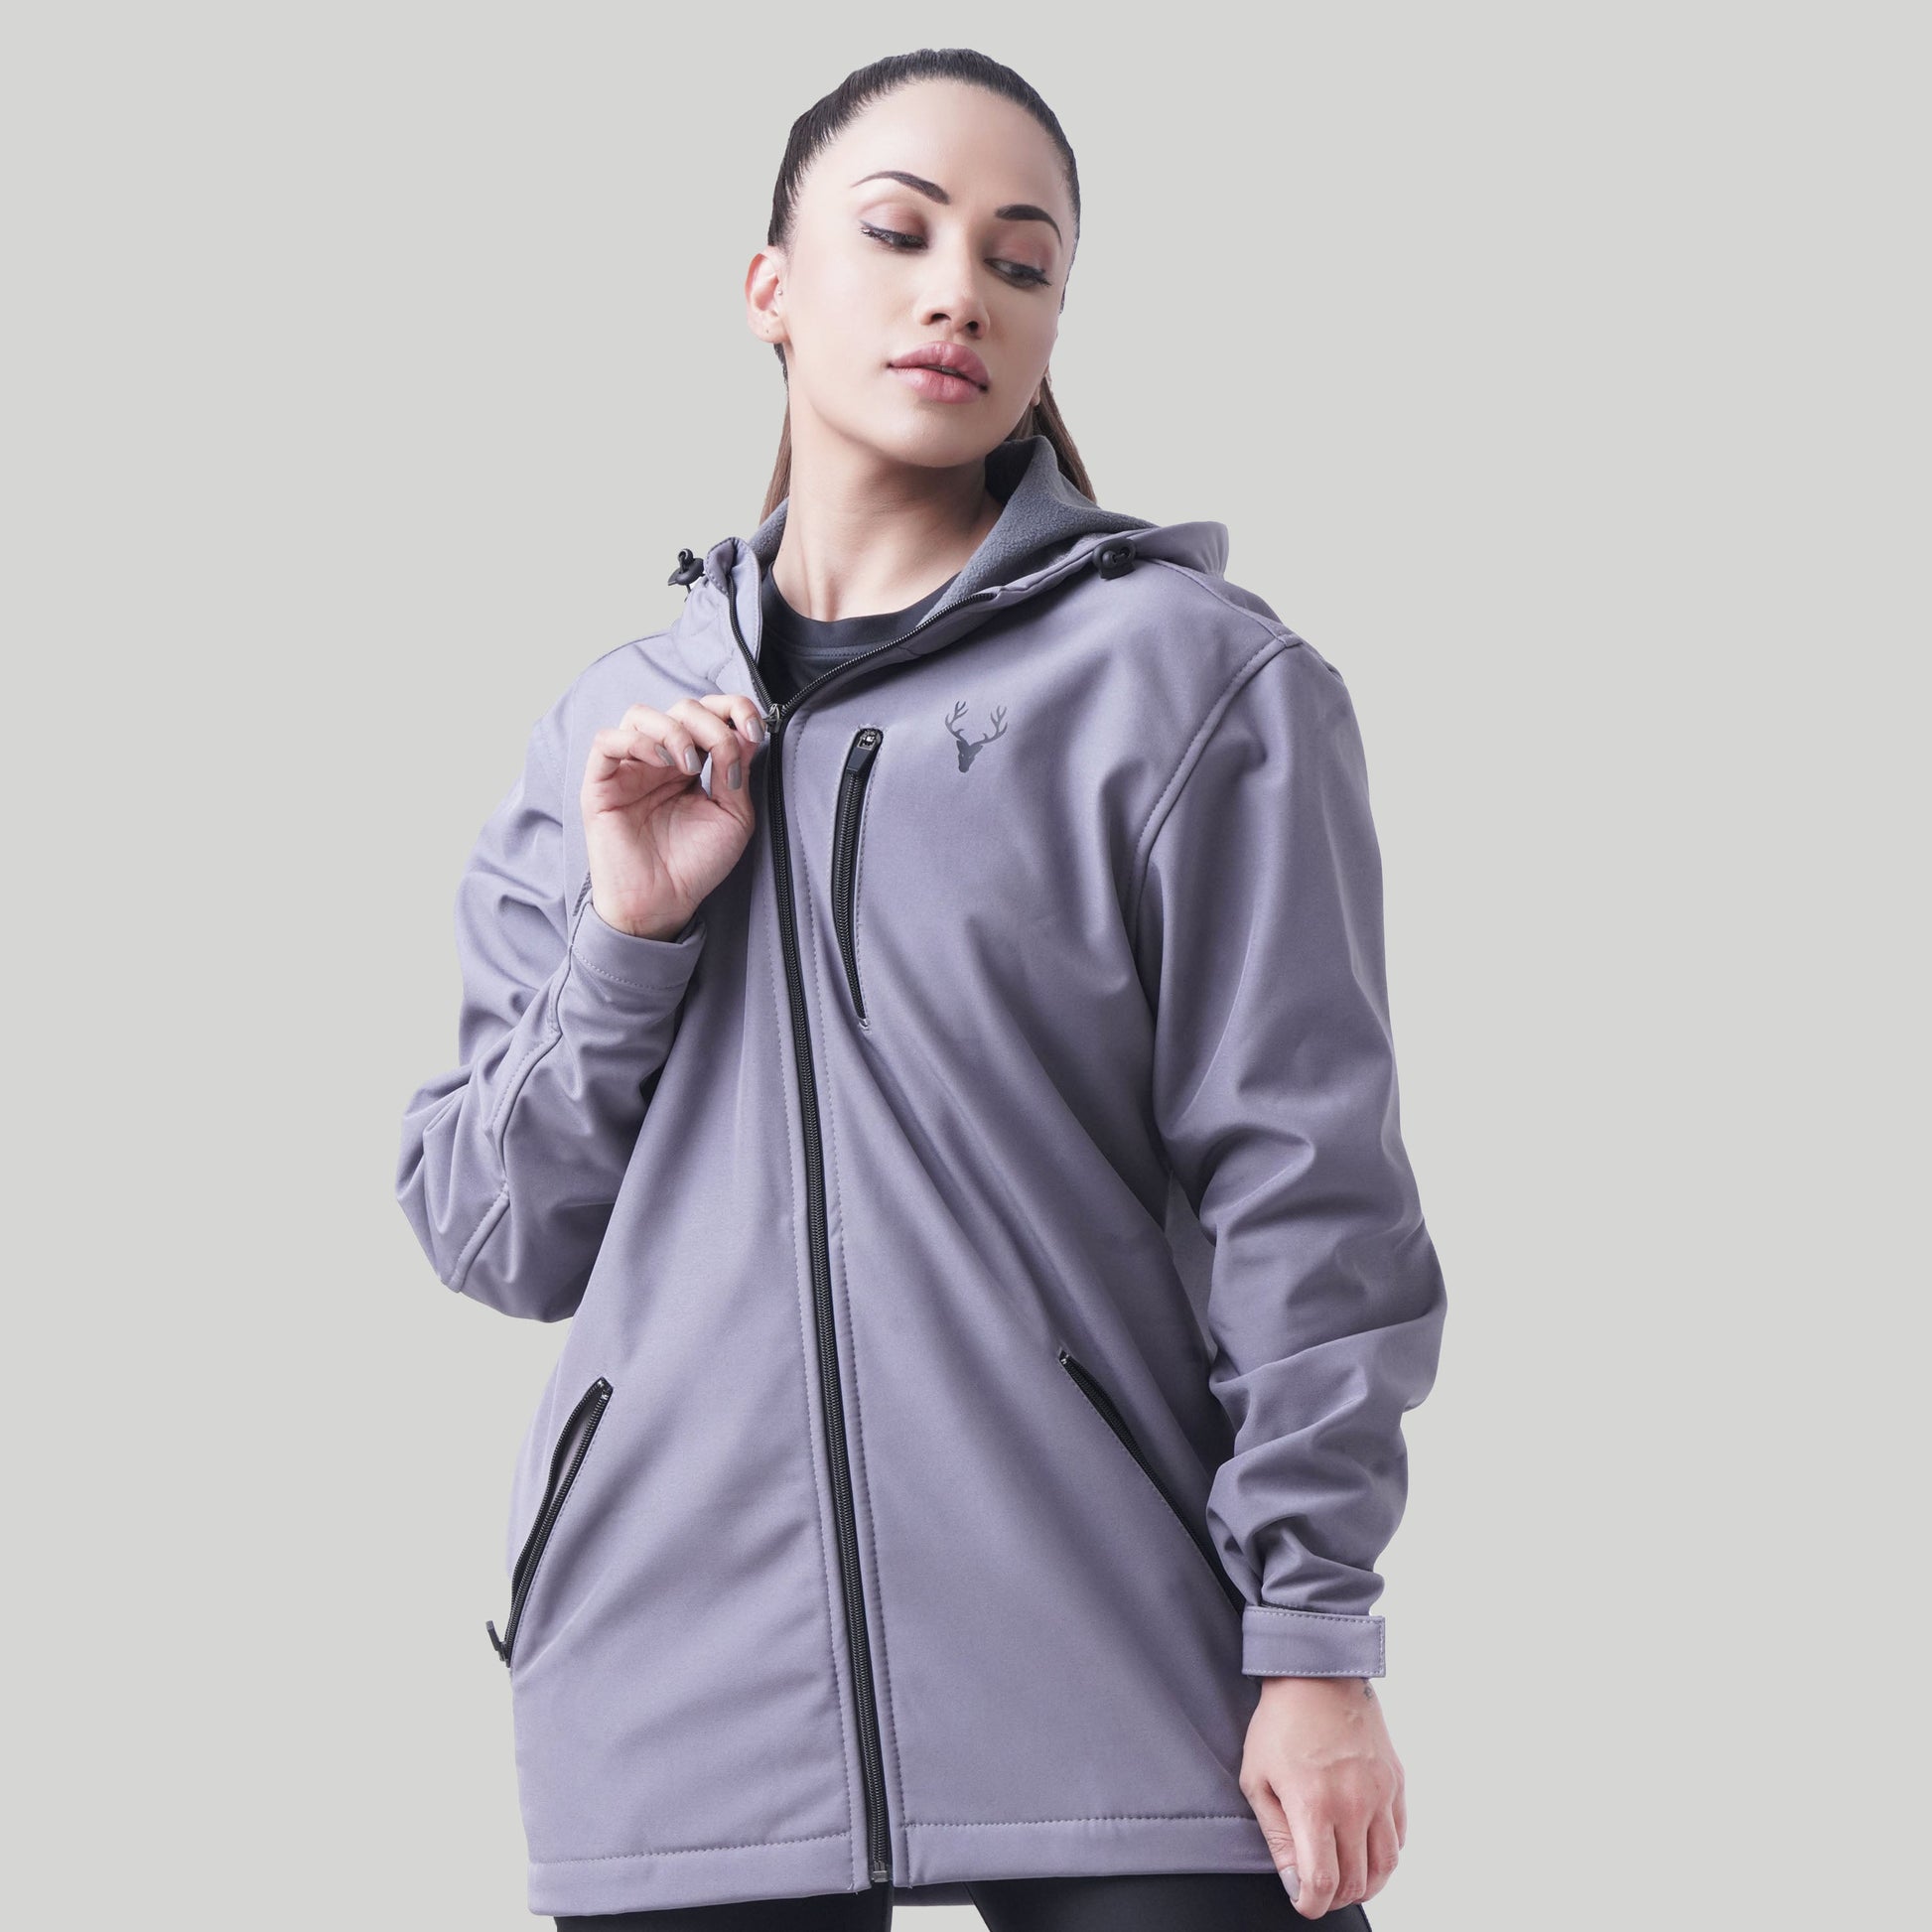 Stag Unisex SoftTech Jacket (Grey) - Stag Clothing